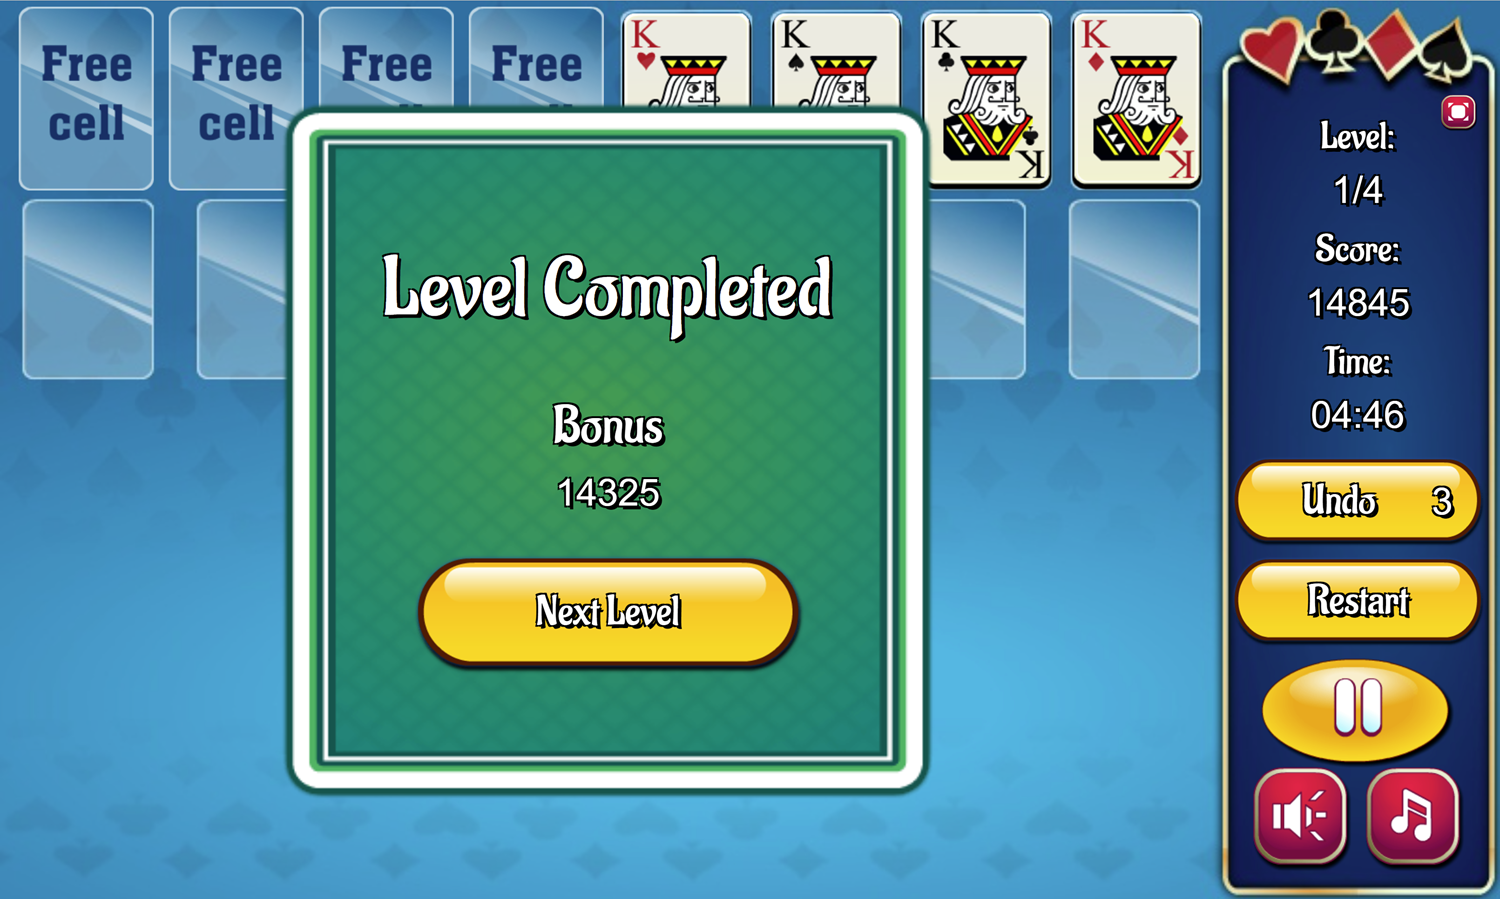 Yukon Freecell Game Level Completed Screen Screenshot.